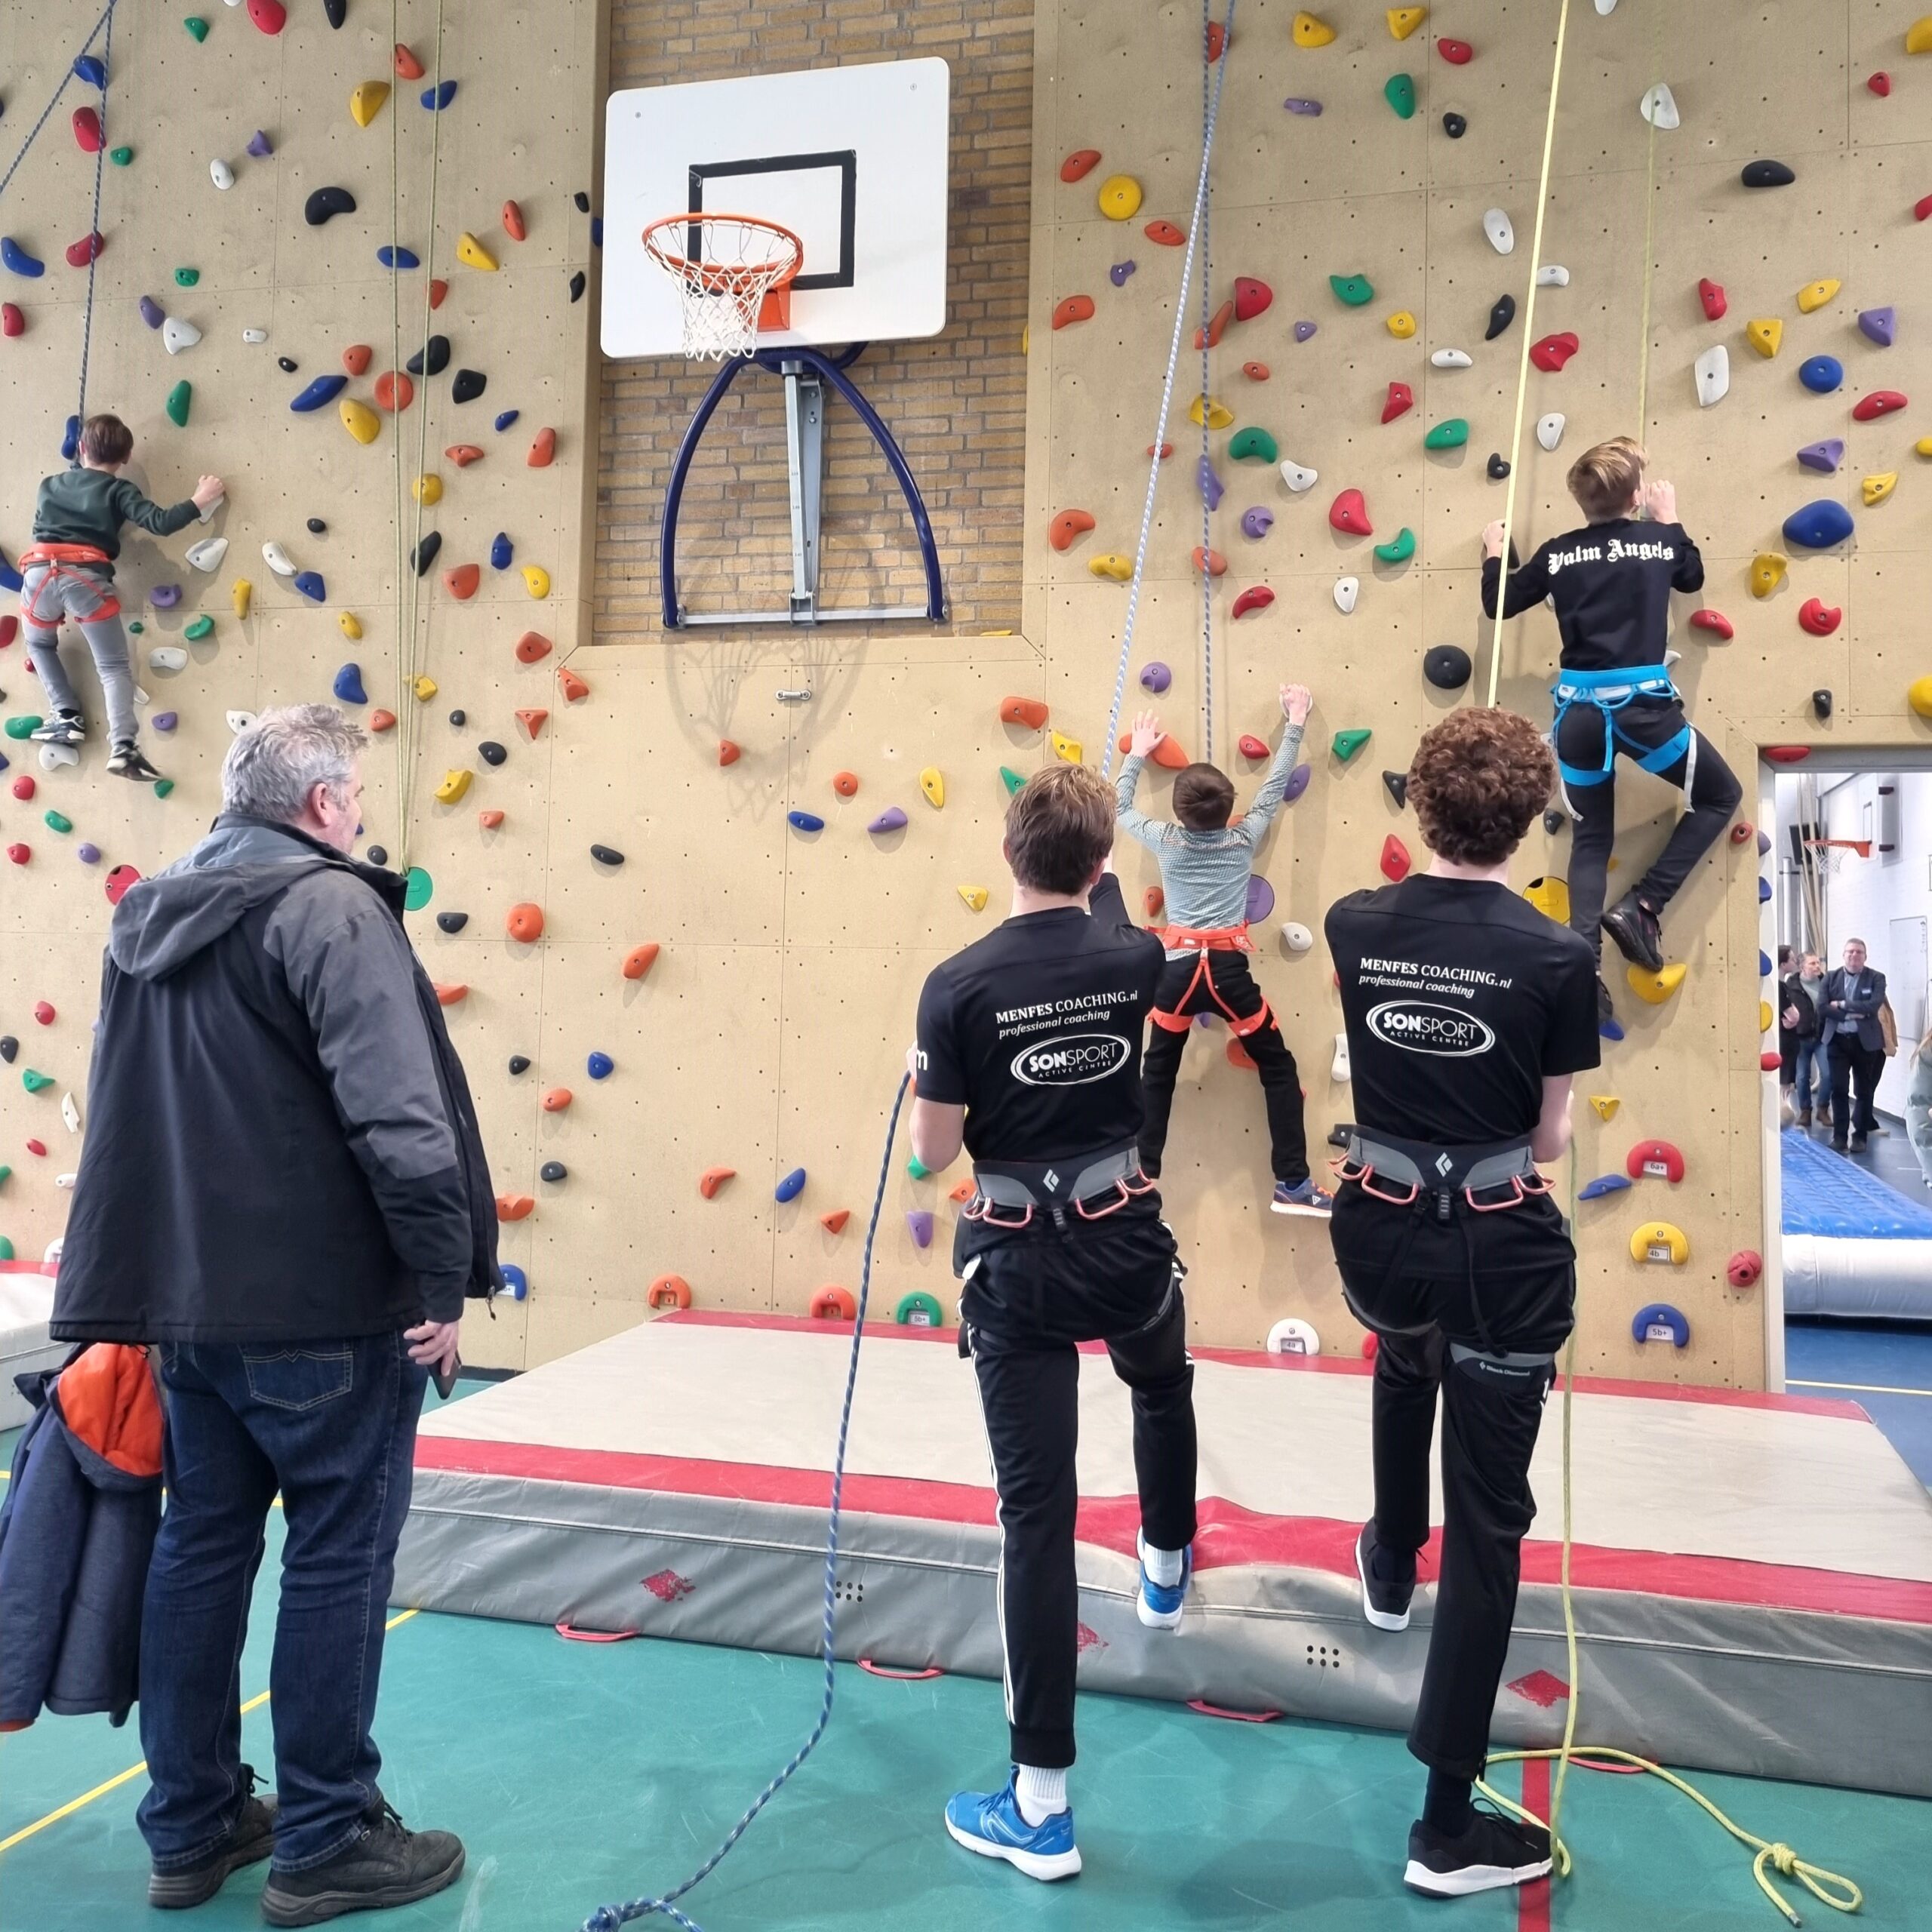 try out climbing wall during open day